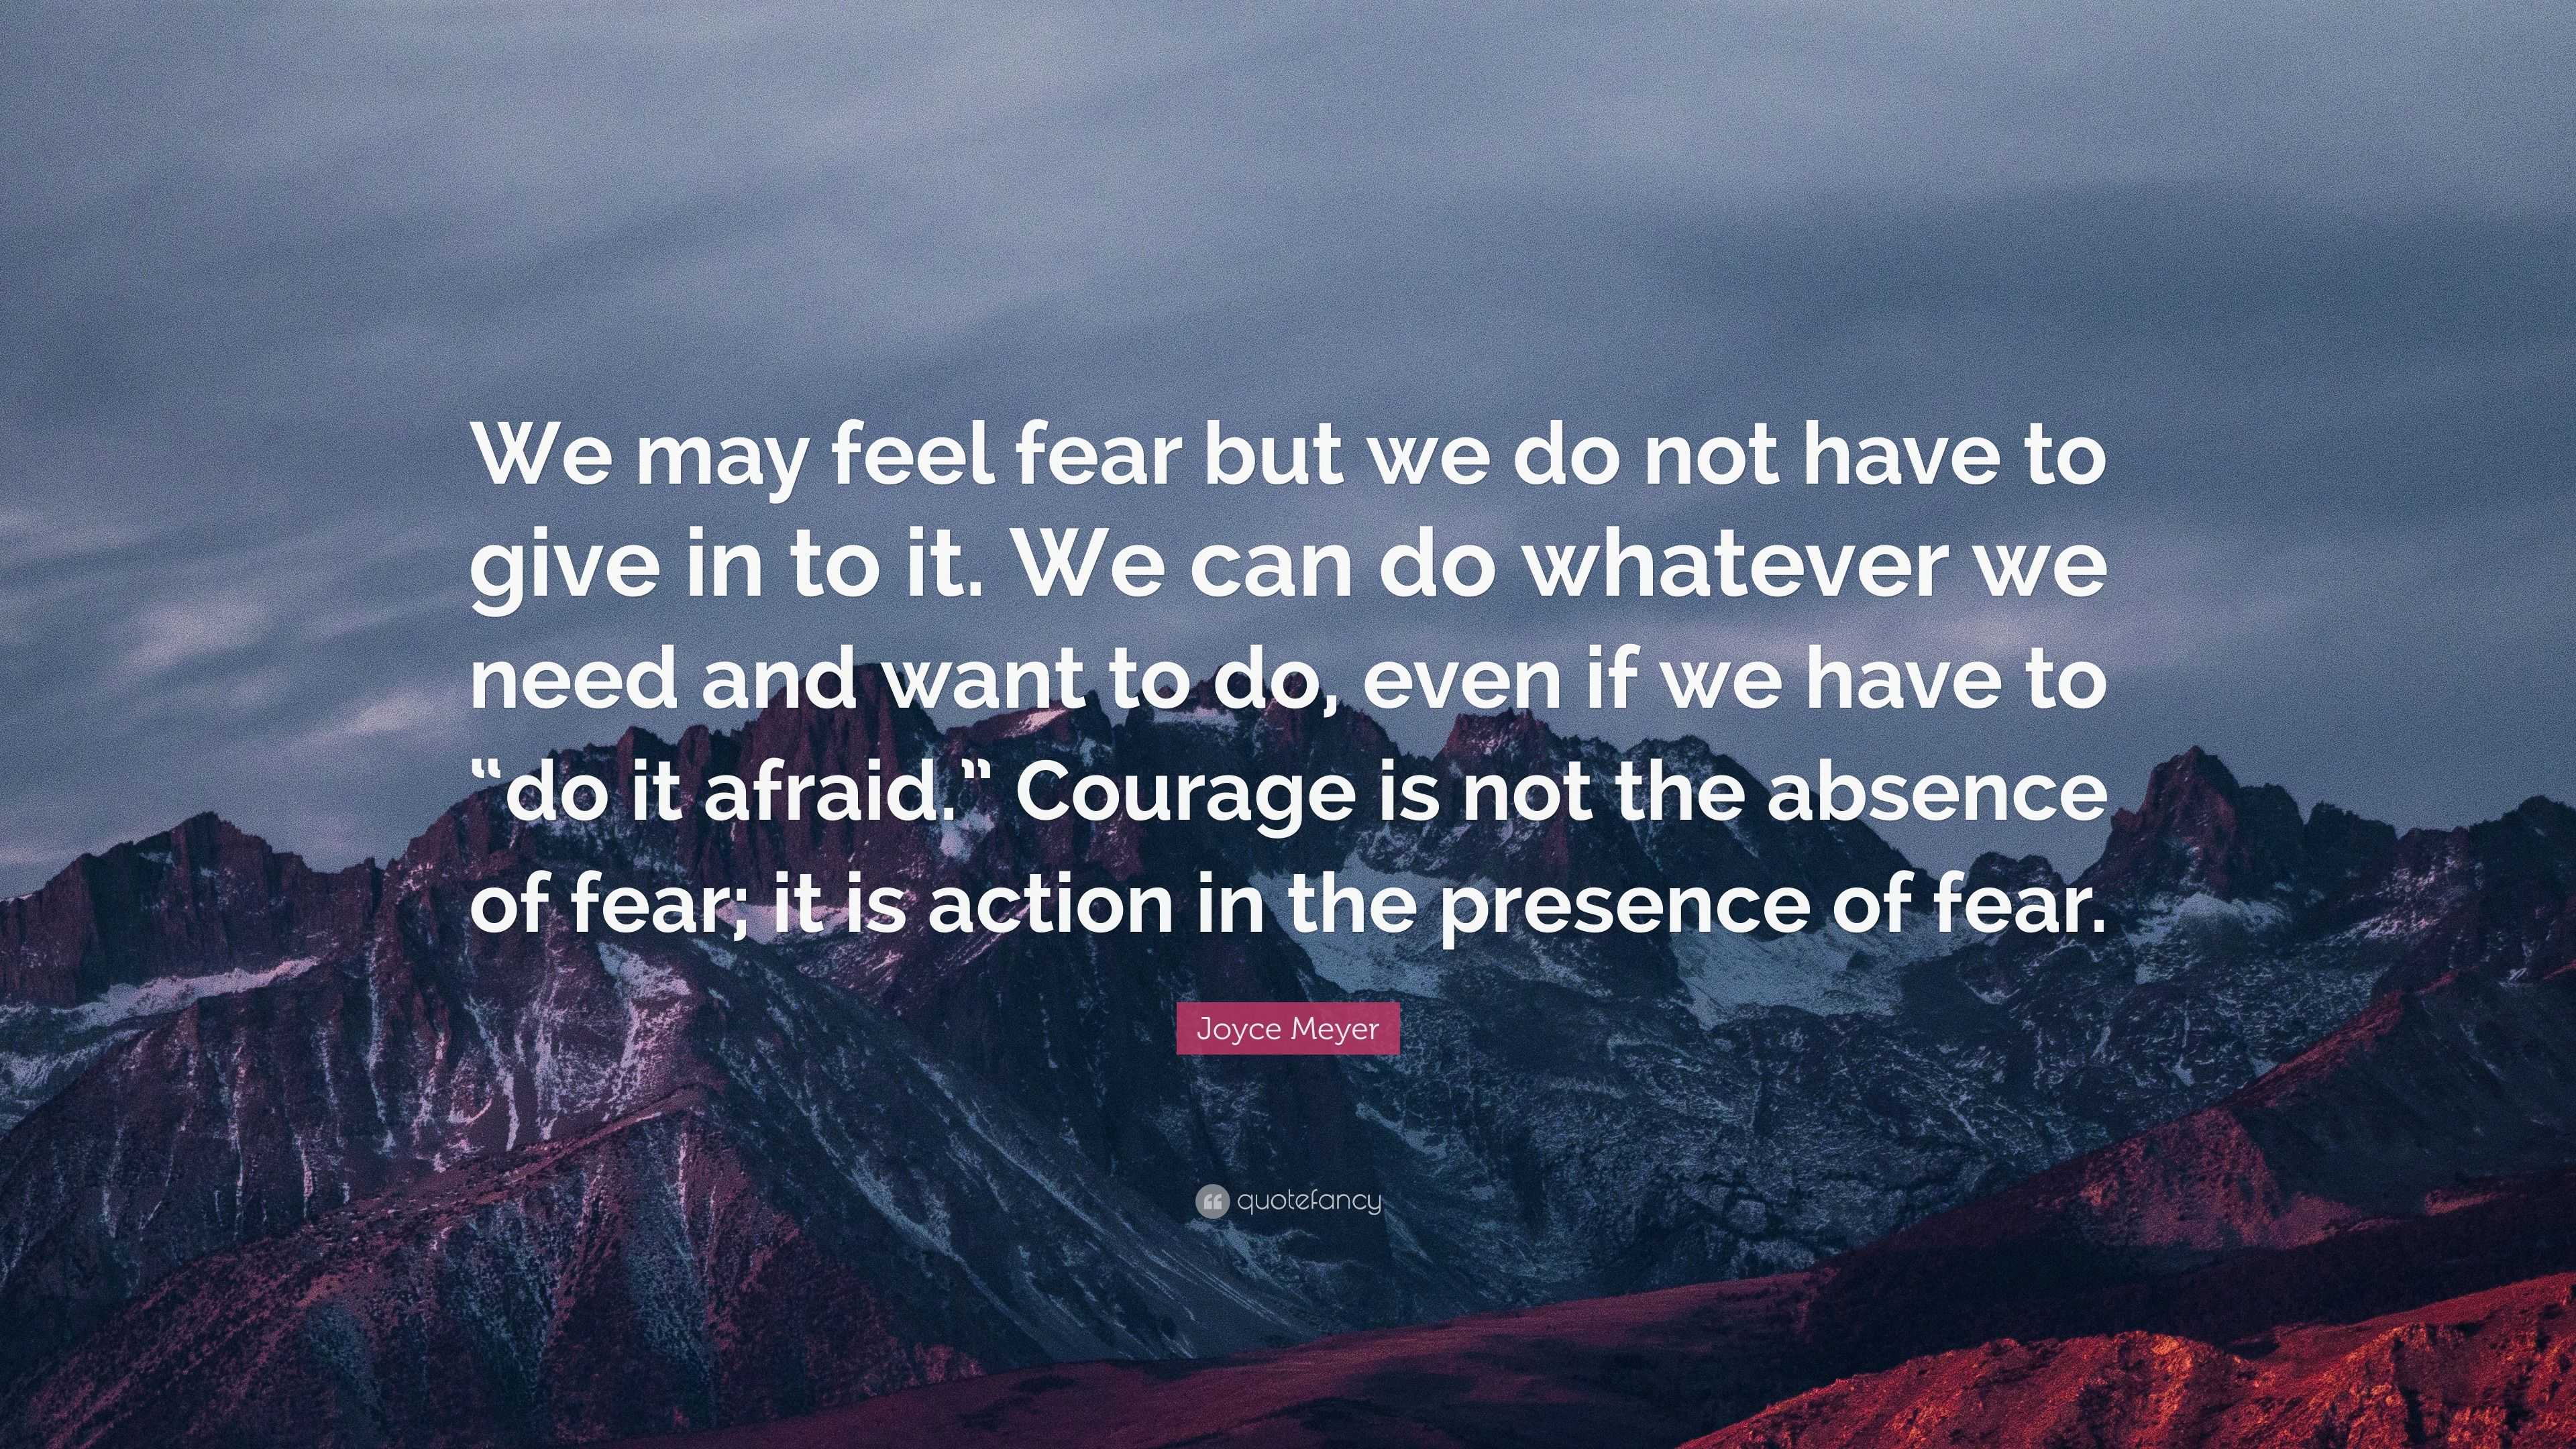 Joyce Meyer Quote: “We may feel fear but we do not have to give in to ...